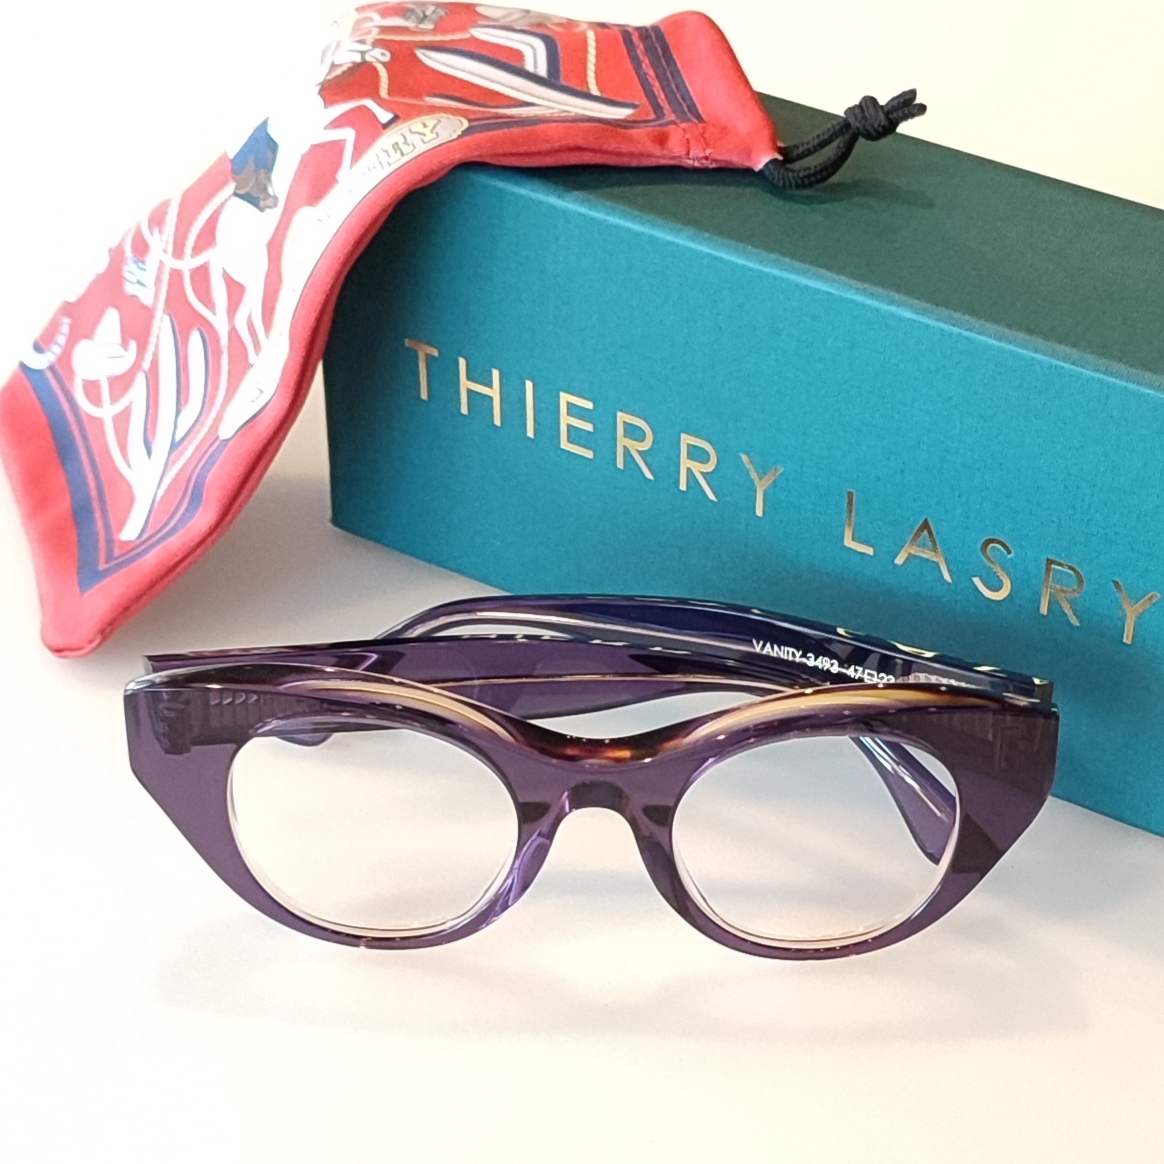 Theirry Lasry Vanity frame in colour 3493